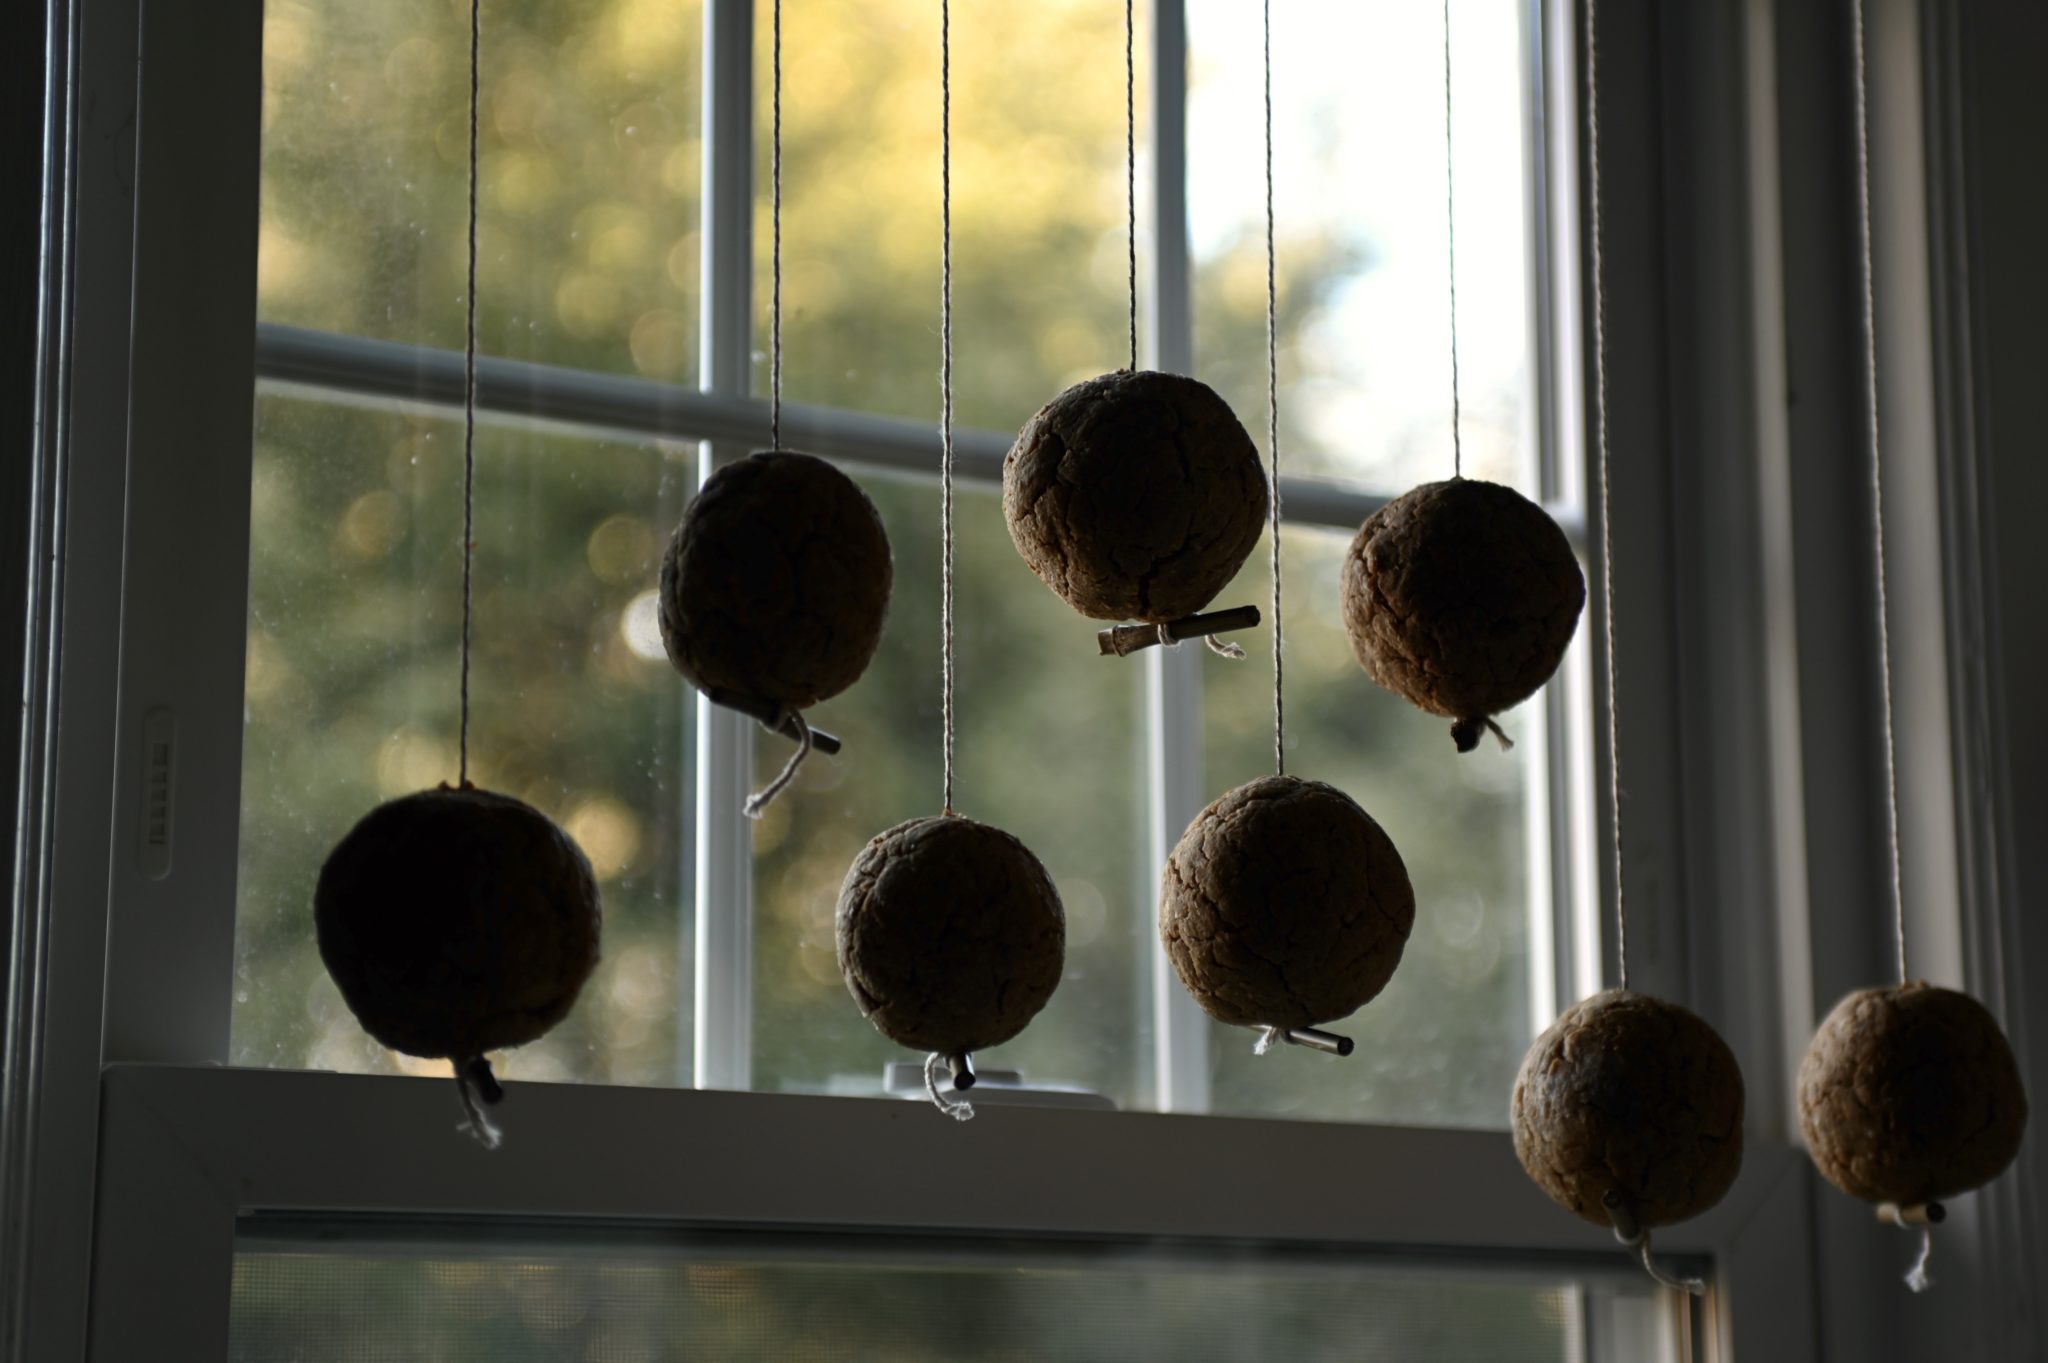 hanging the ball to capture bacteria in the air